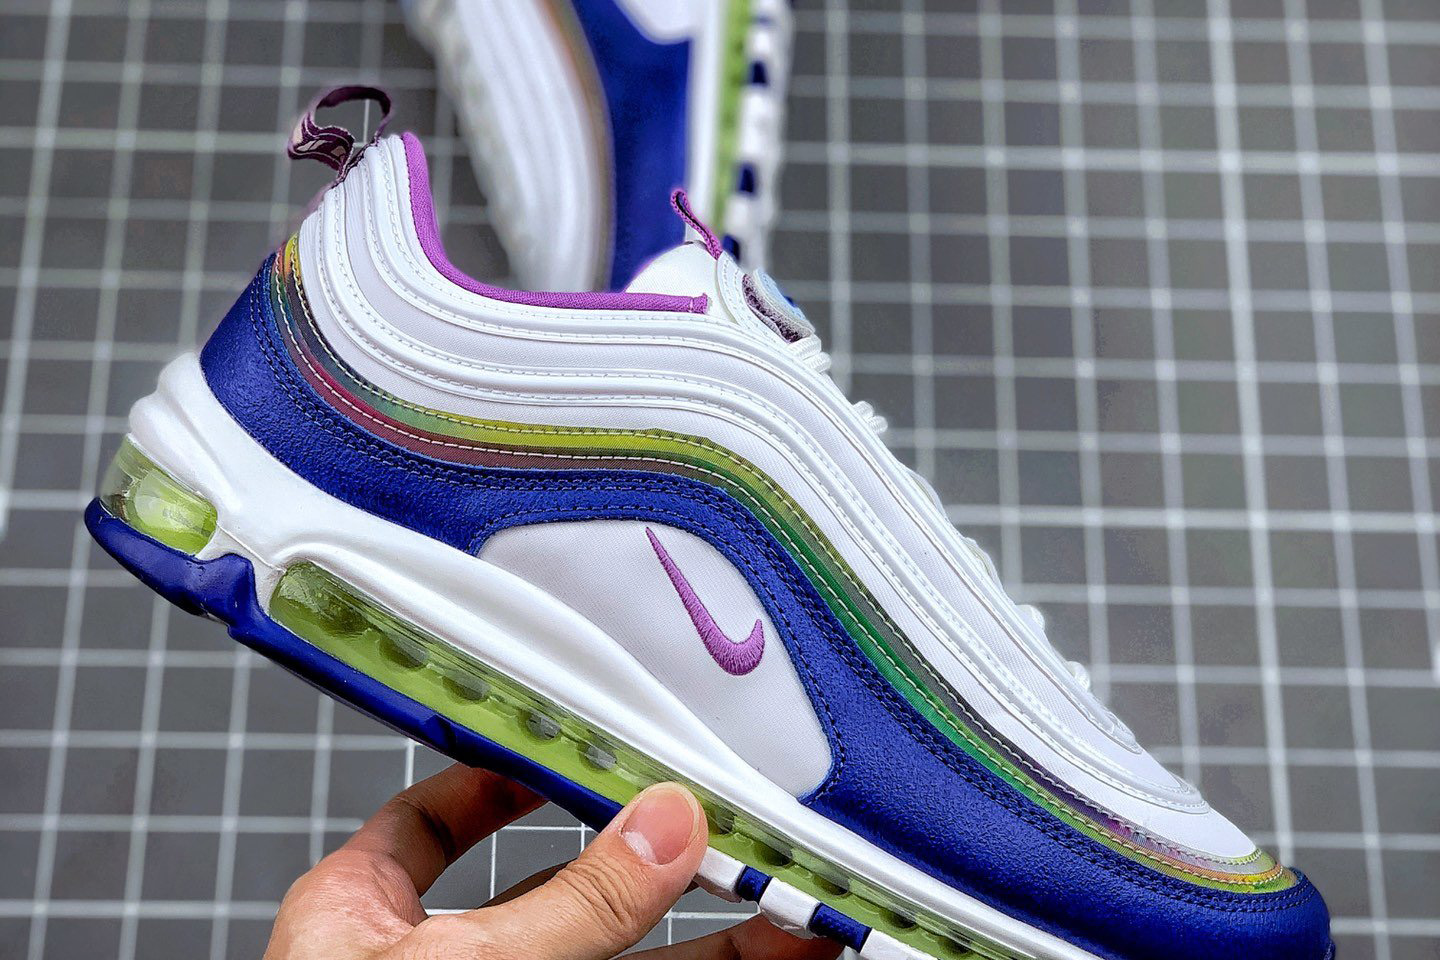 Air Max 97 SH Kaleidoscope couples are 